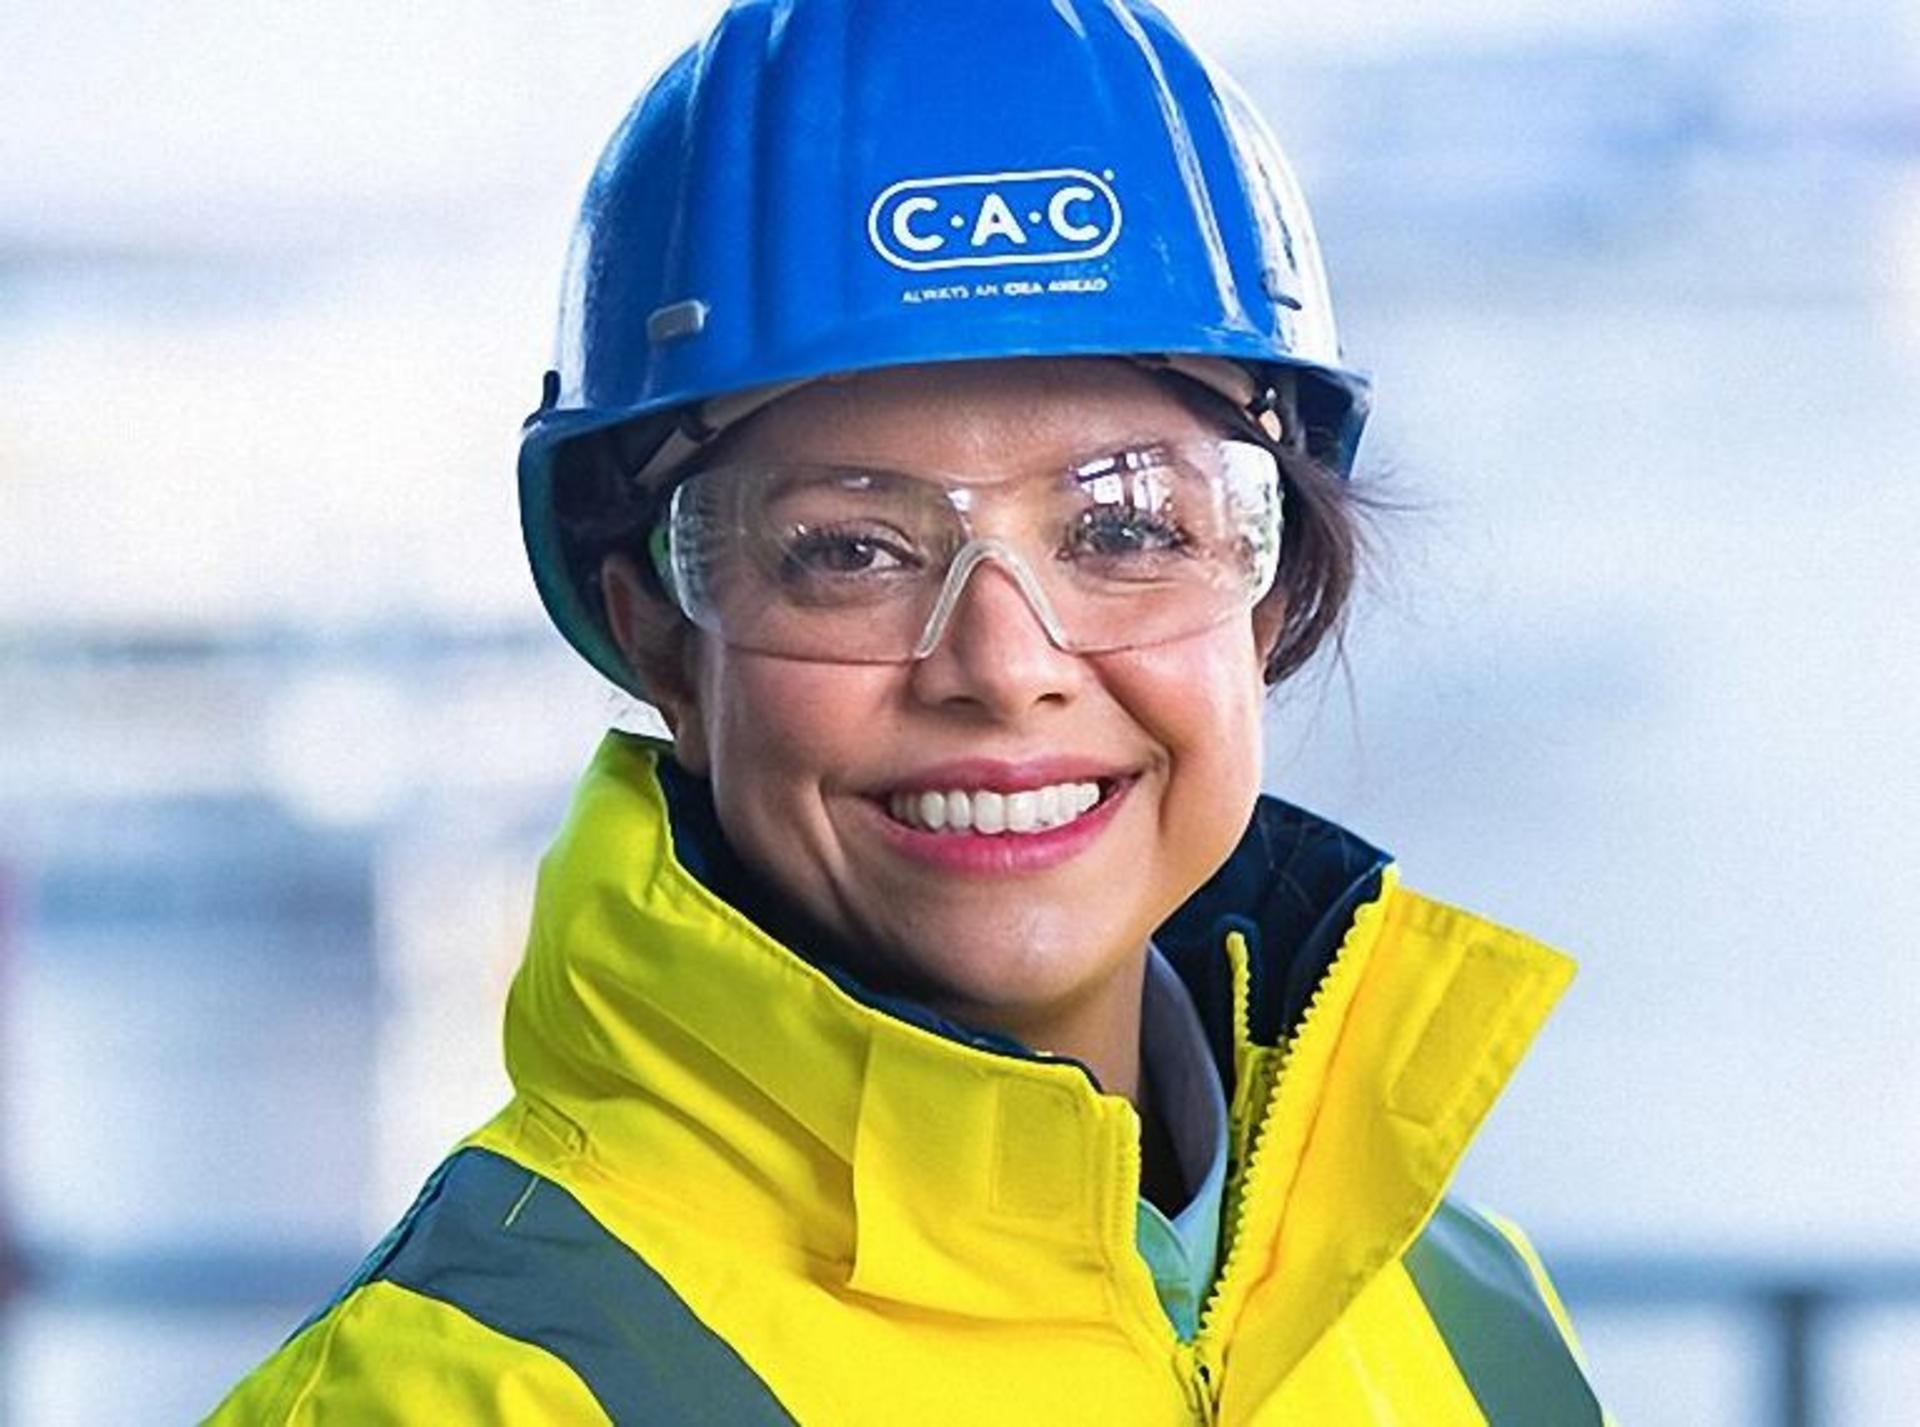 CAC employee wearing protective clothing